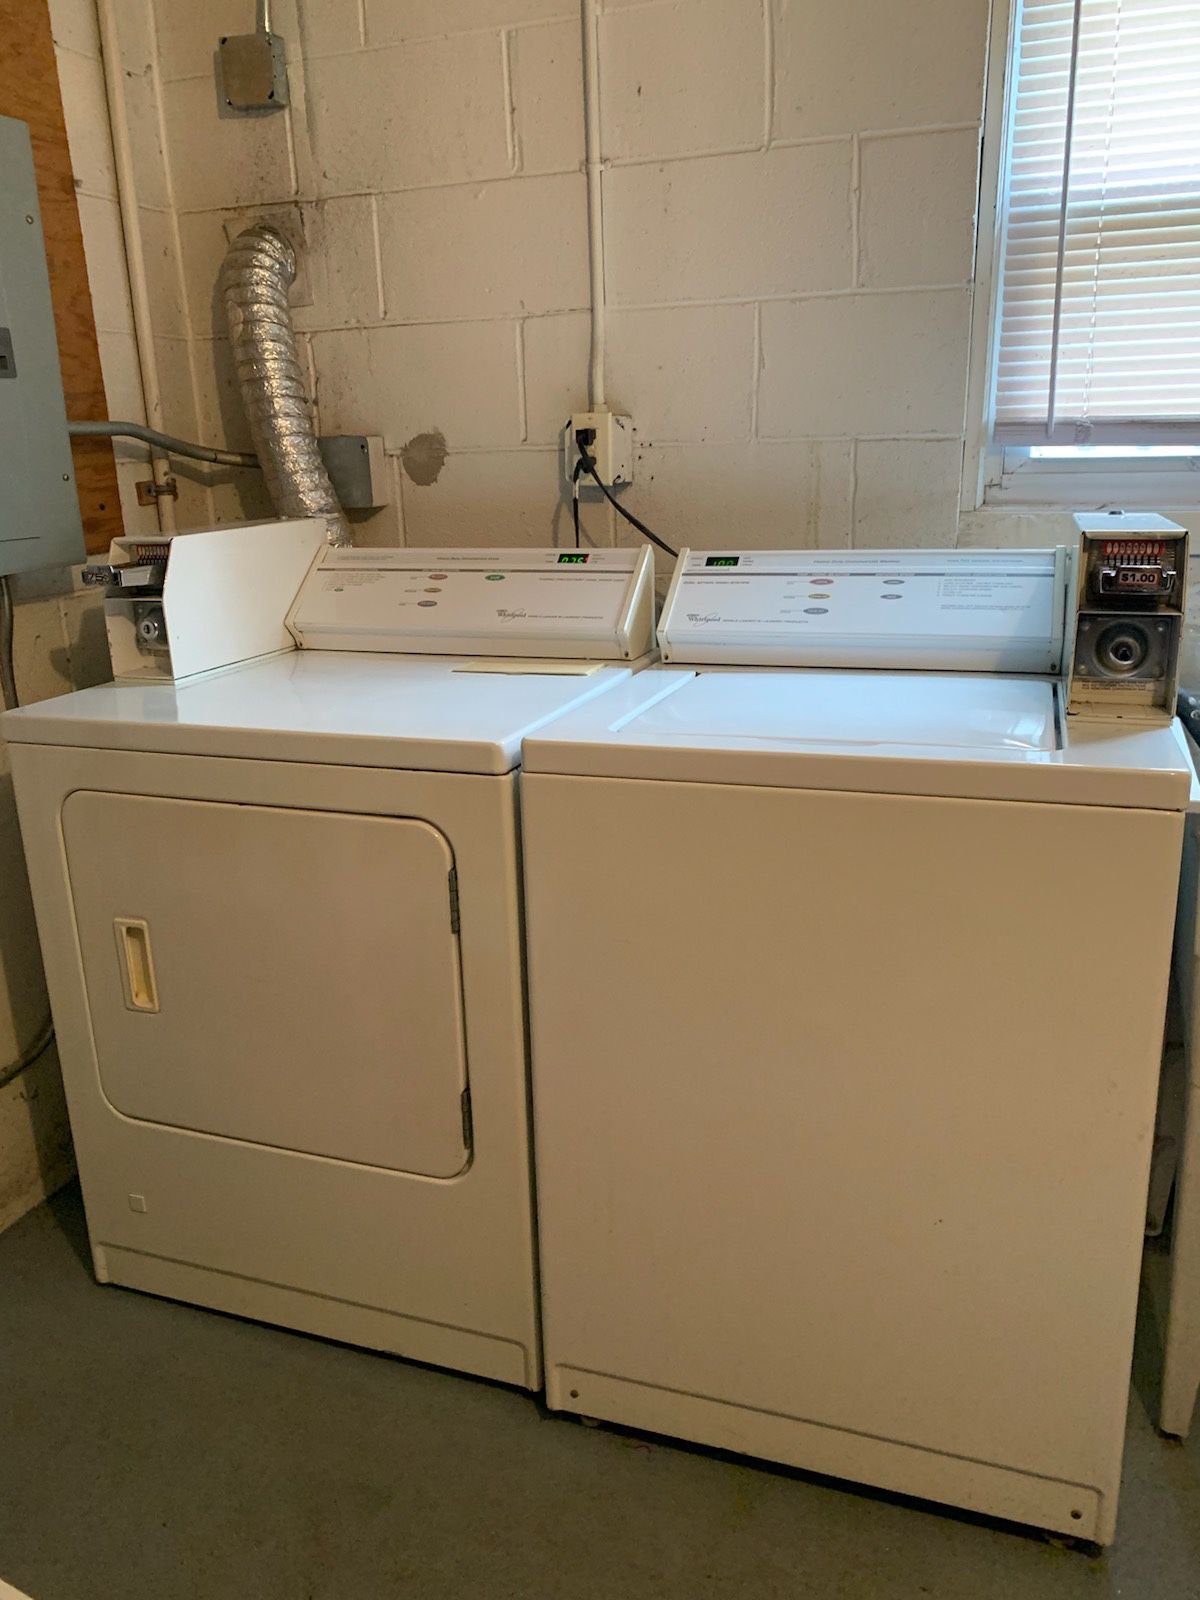 Whirlpool coin operated washer and dryer with keys.